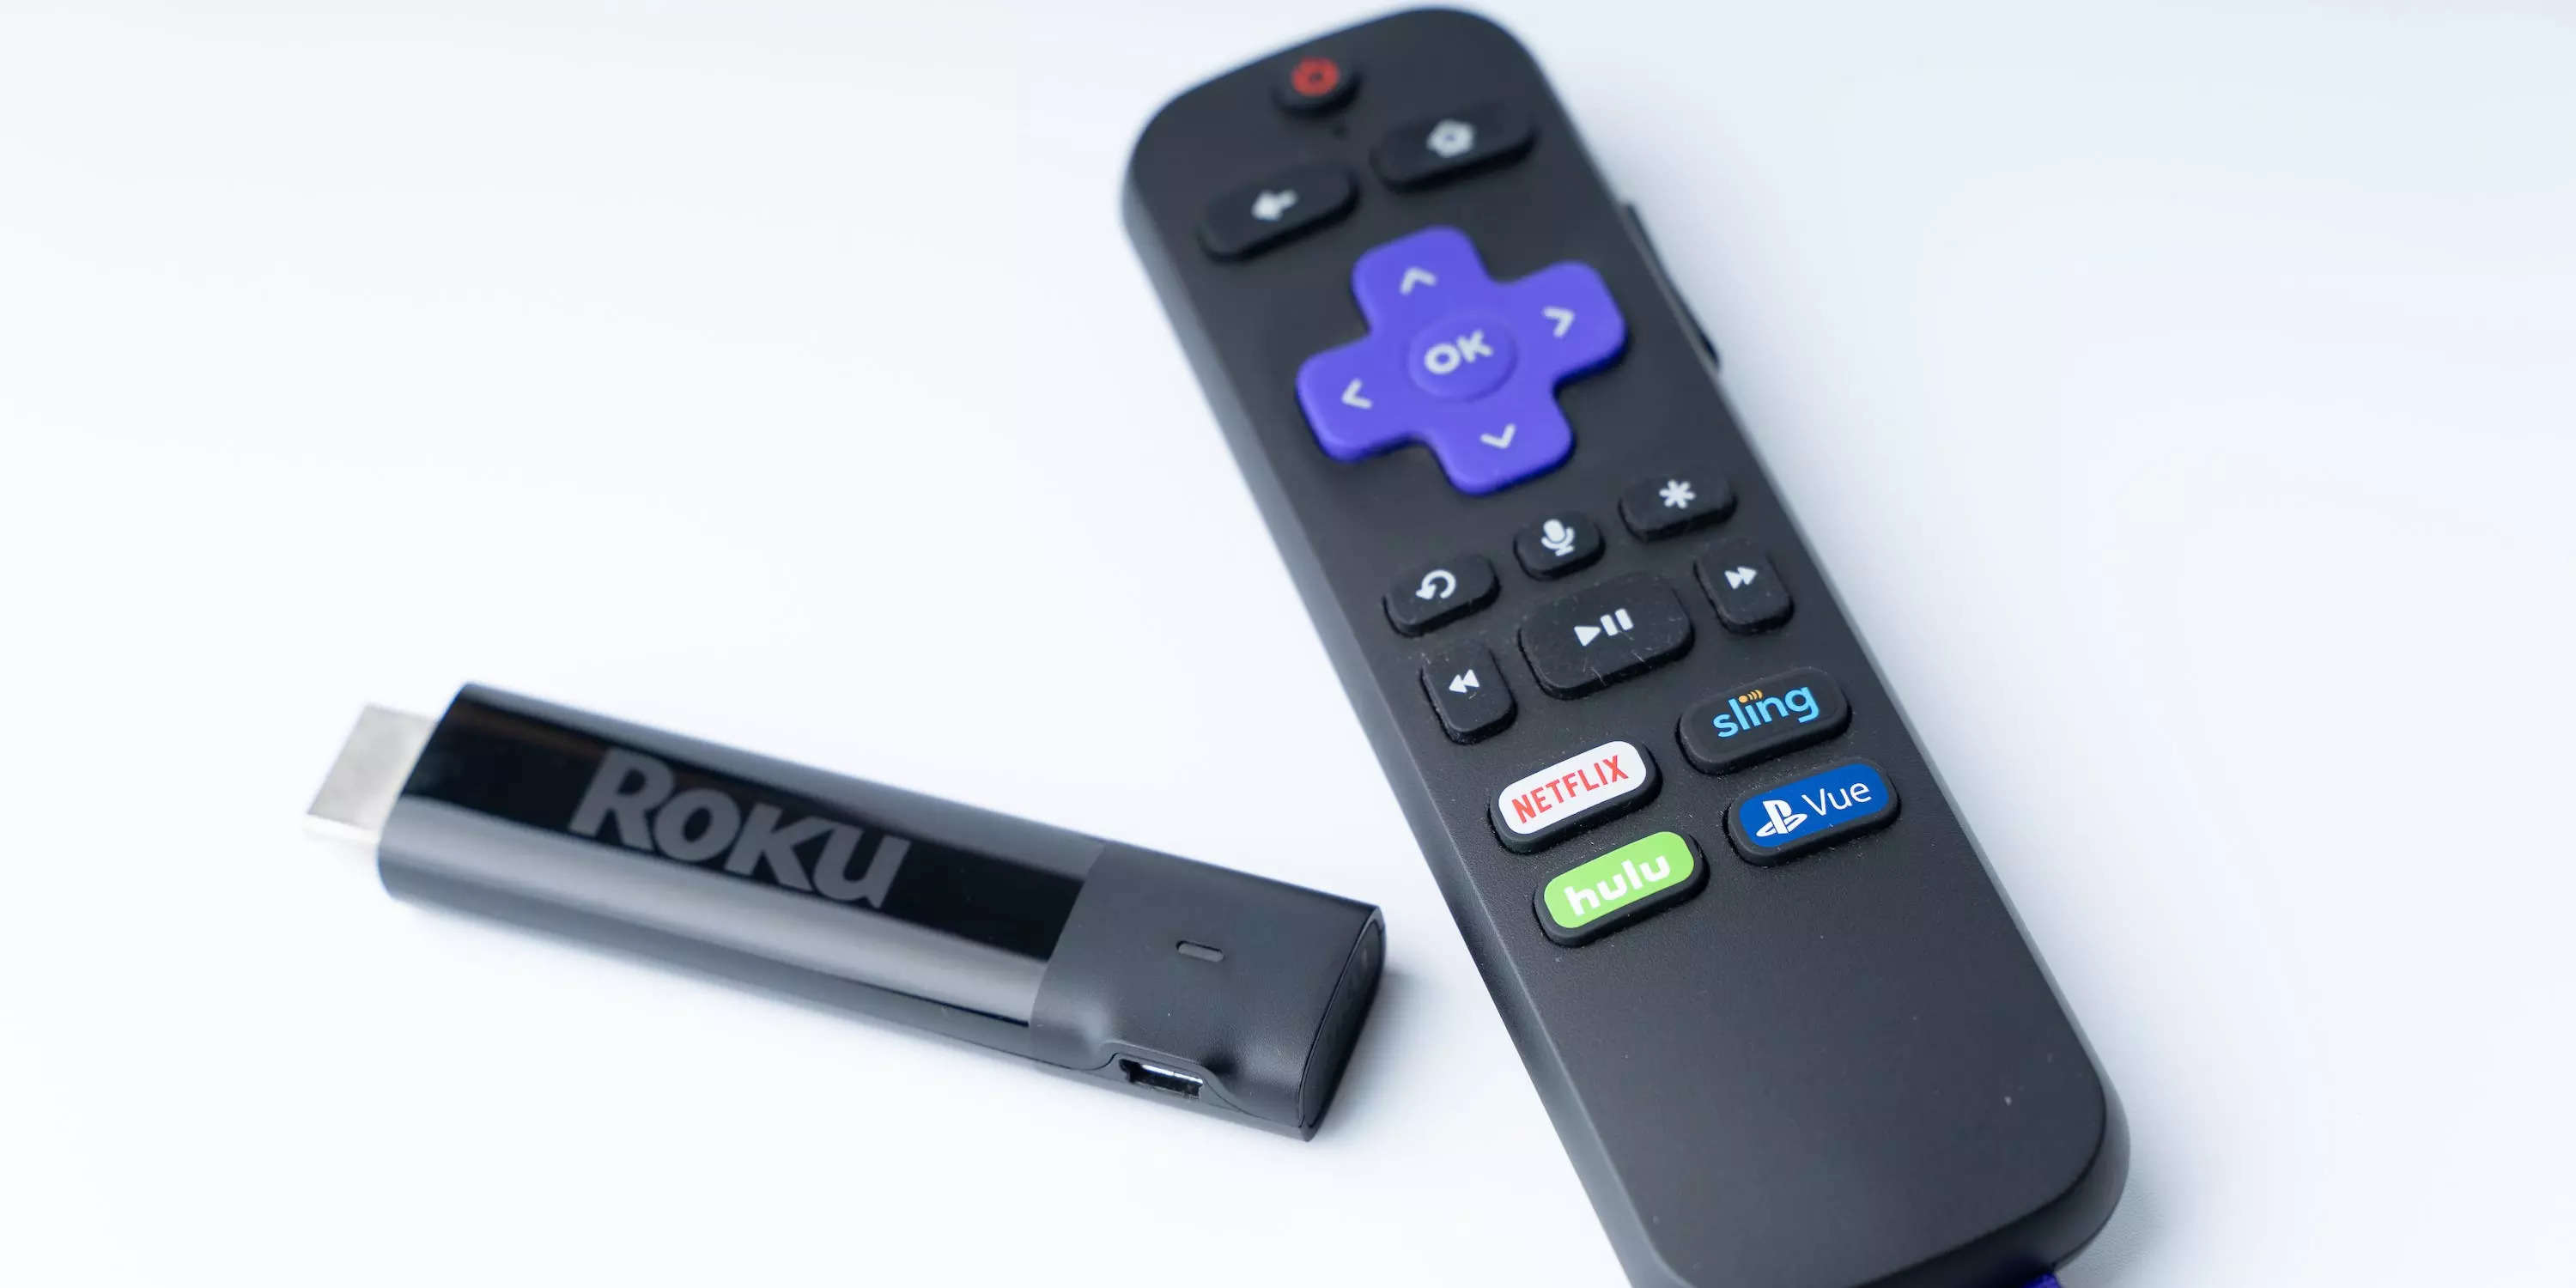 How to connect a Roku streaming stick to your TV